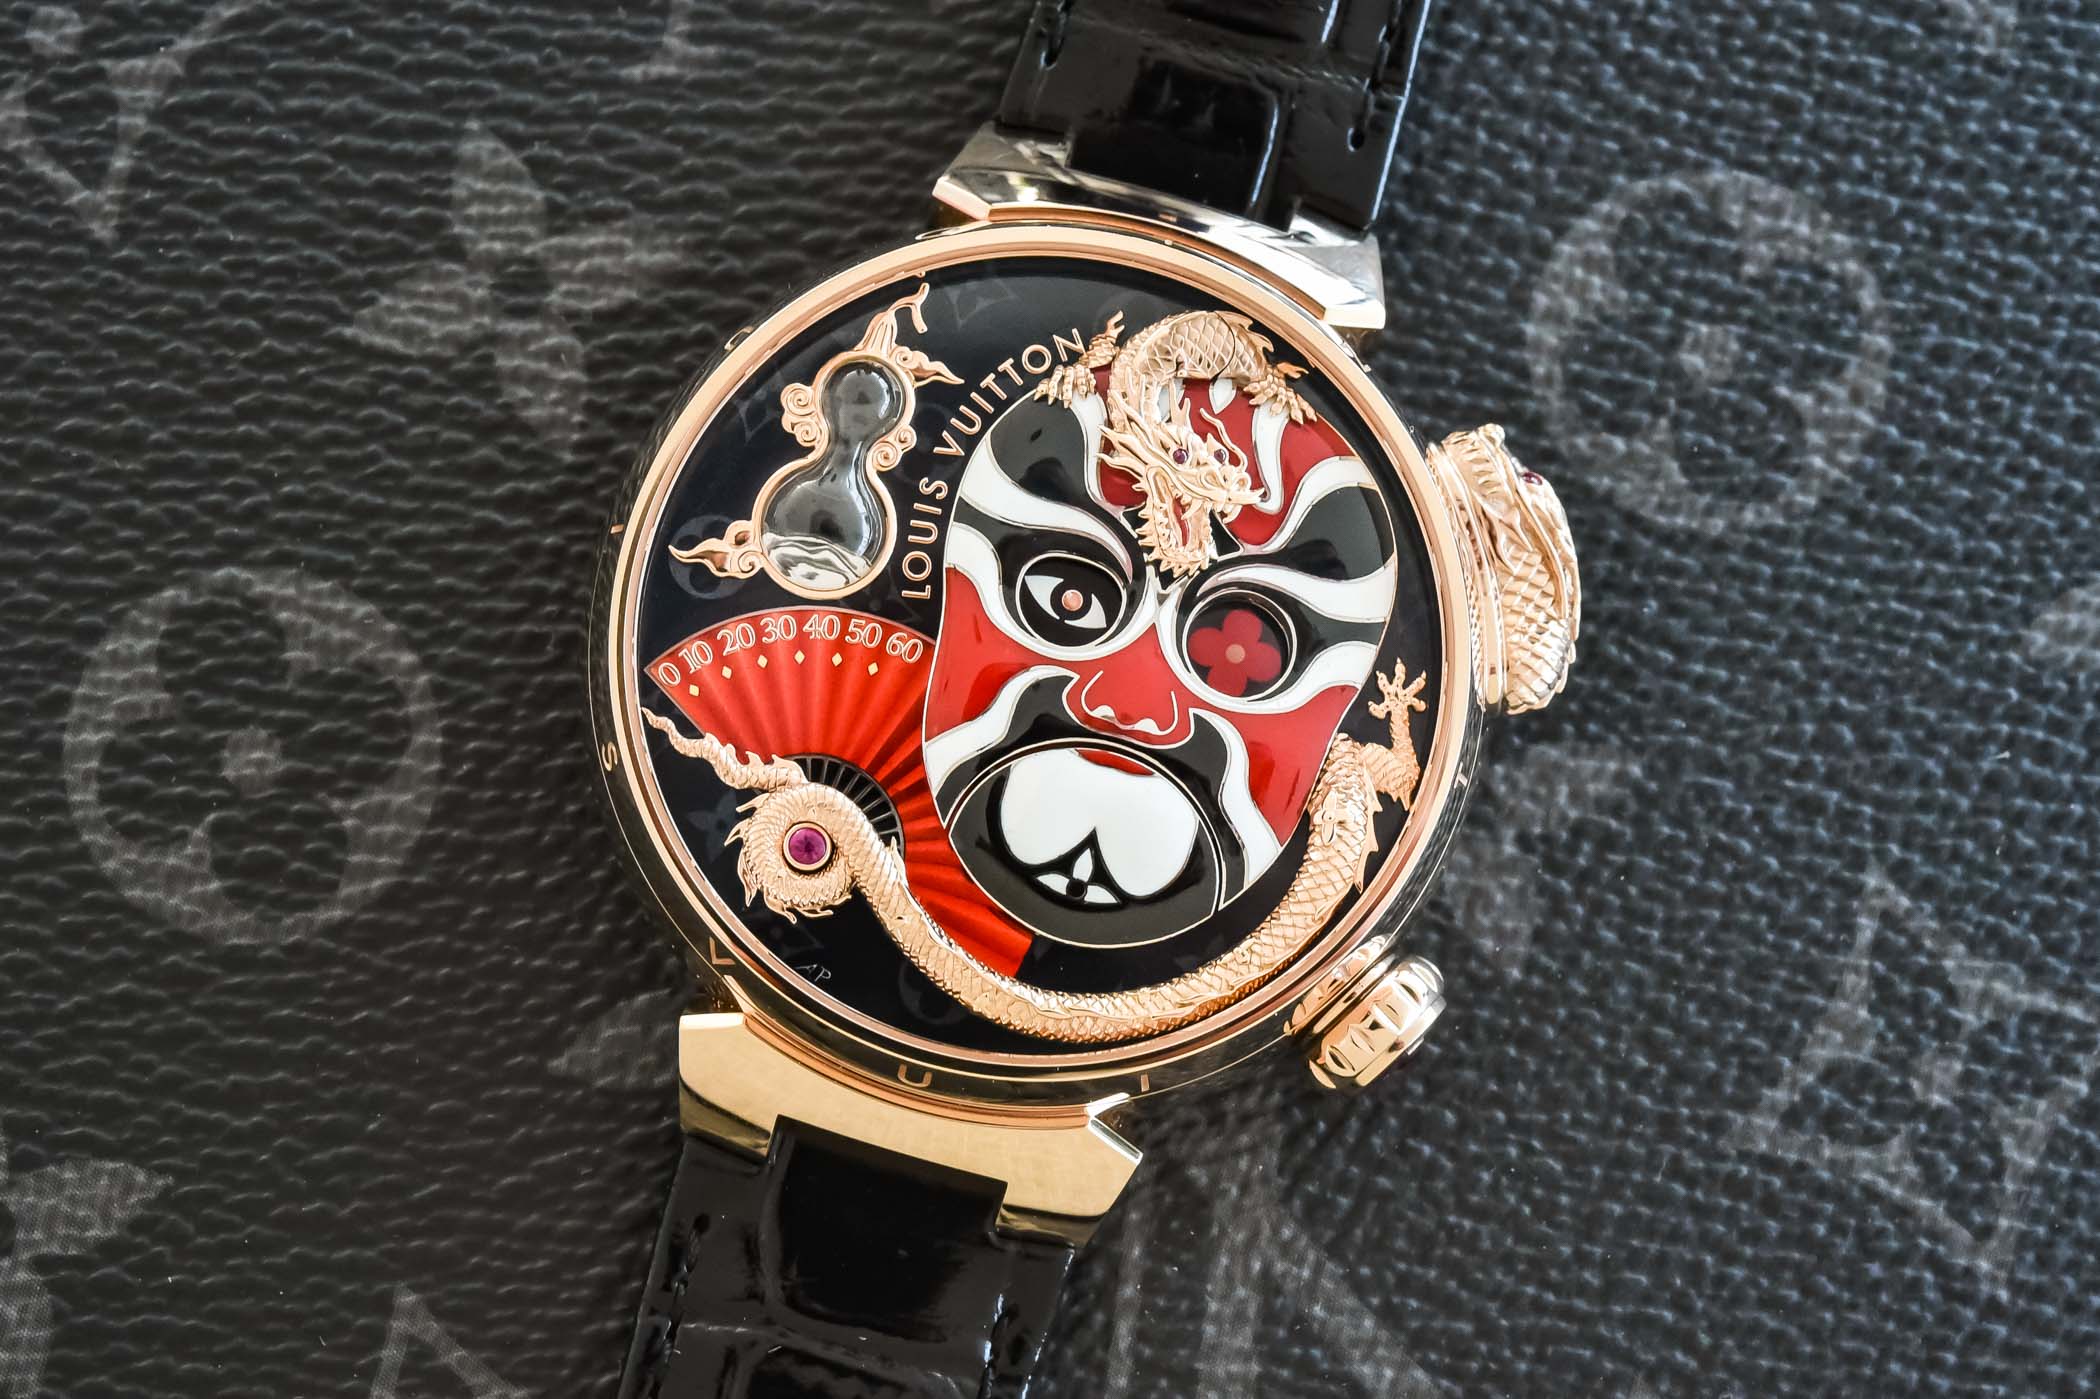 Experience the Magic of the New Tambour Opera Automata by Louis Vuitton